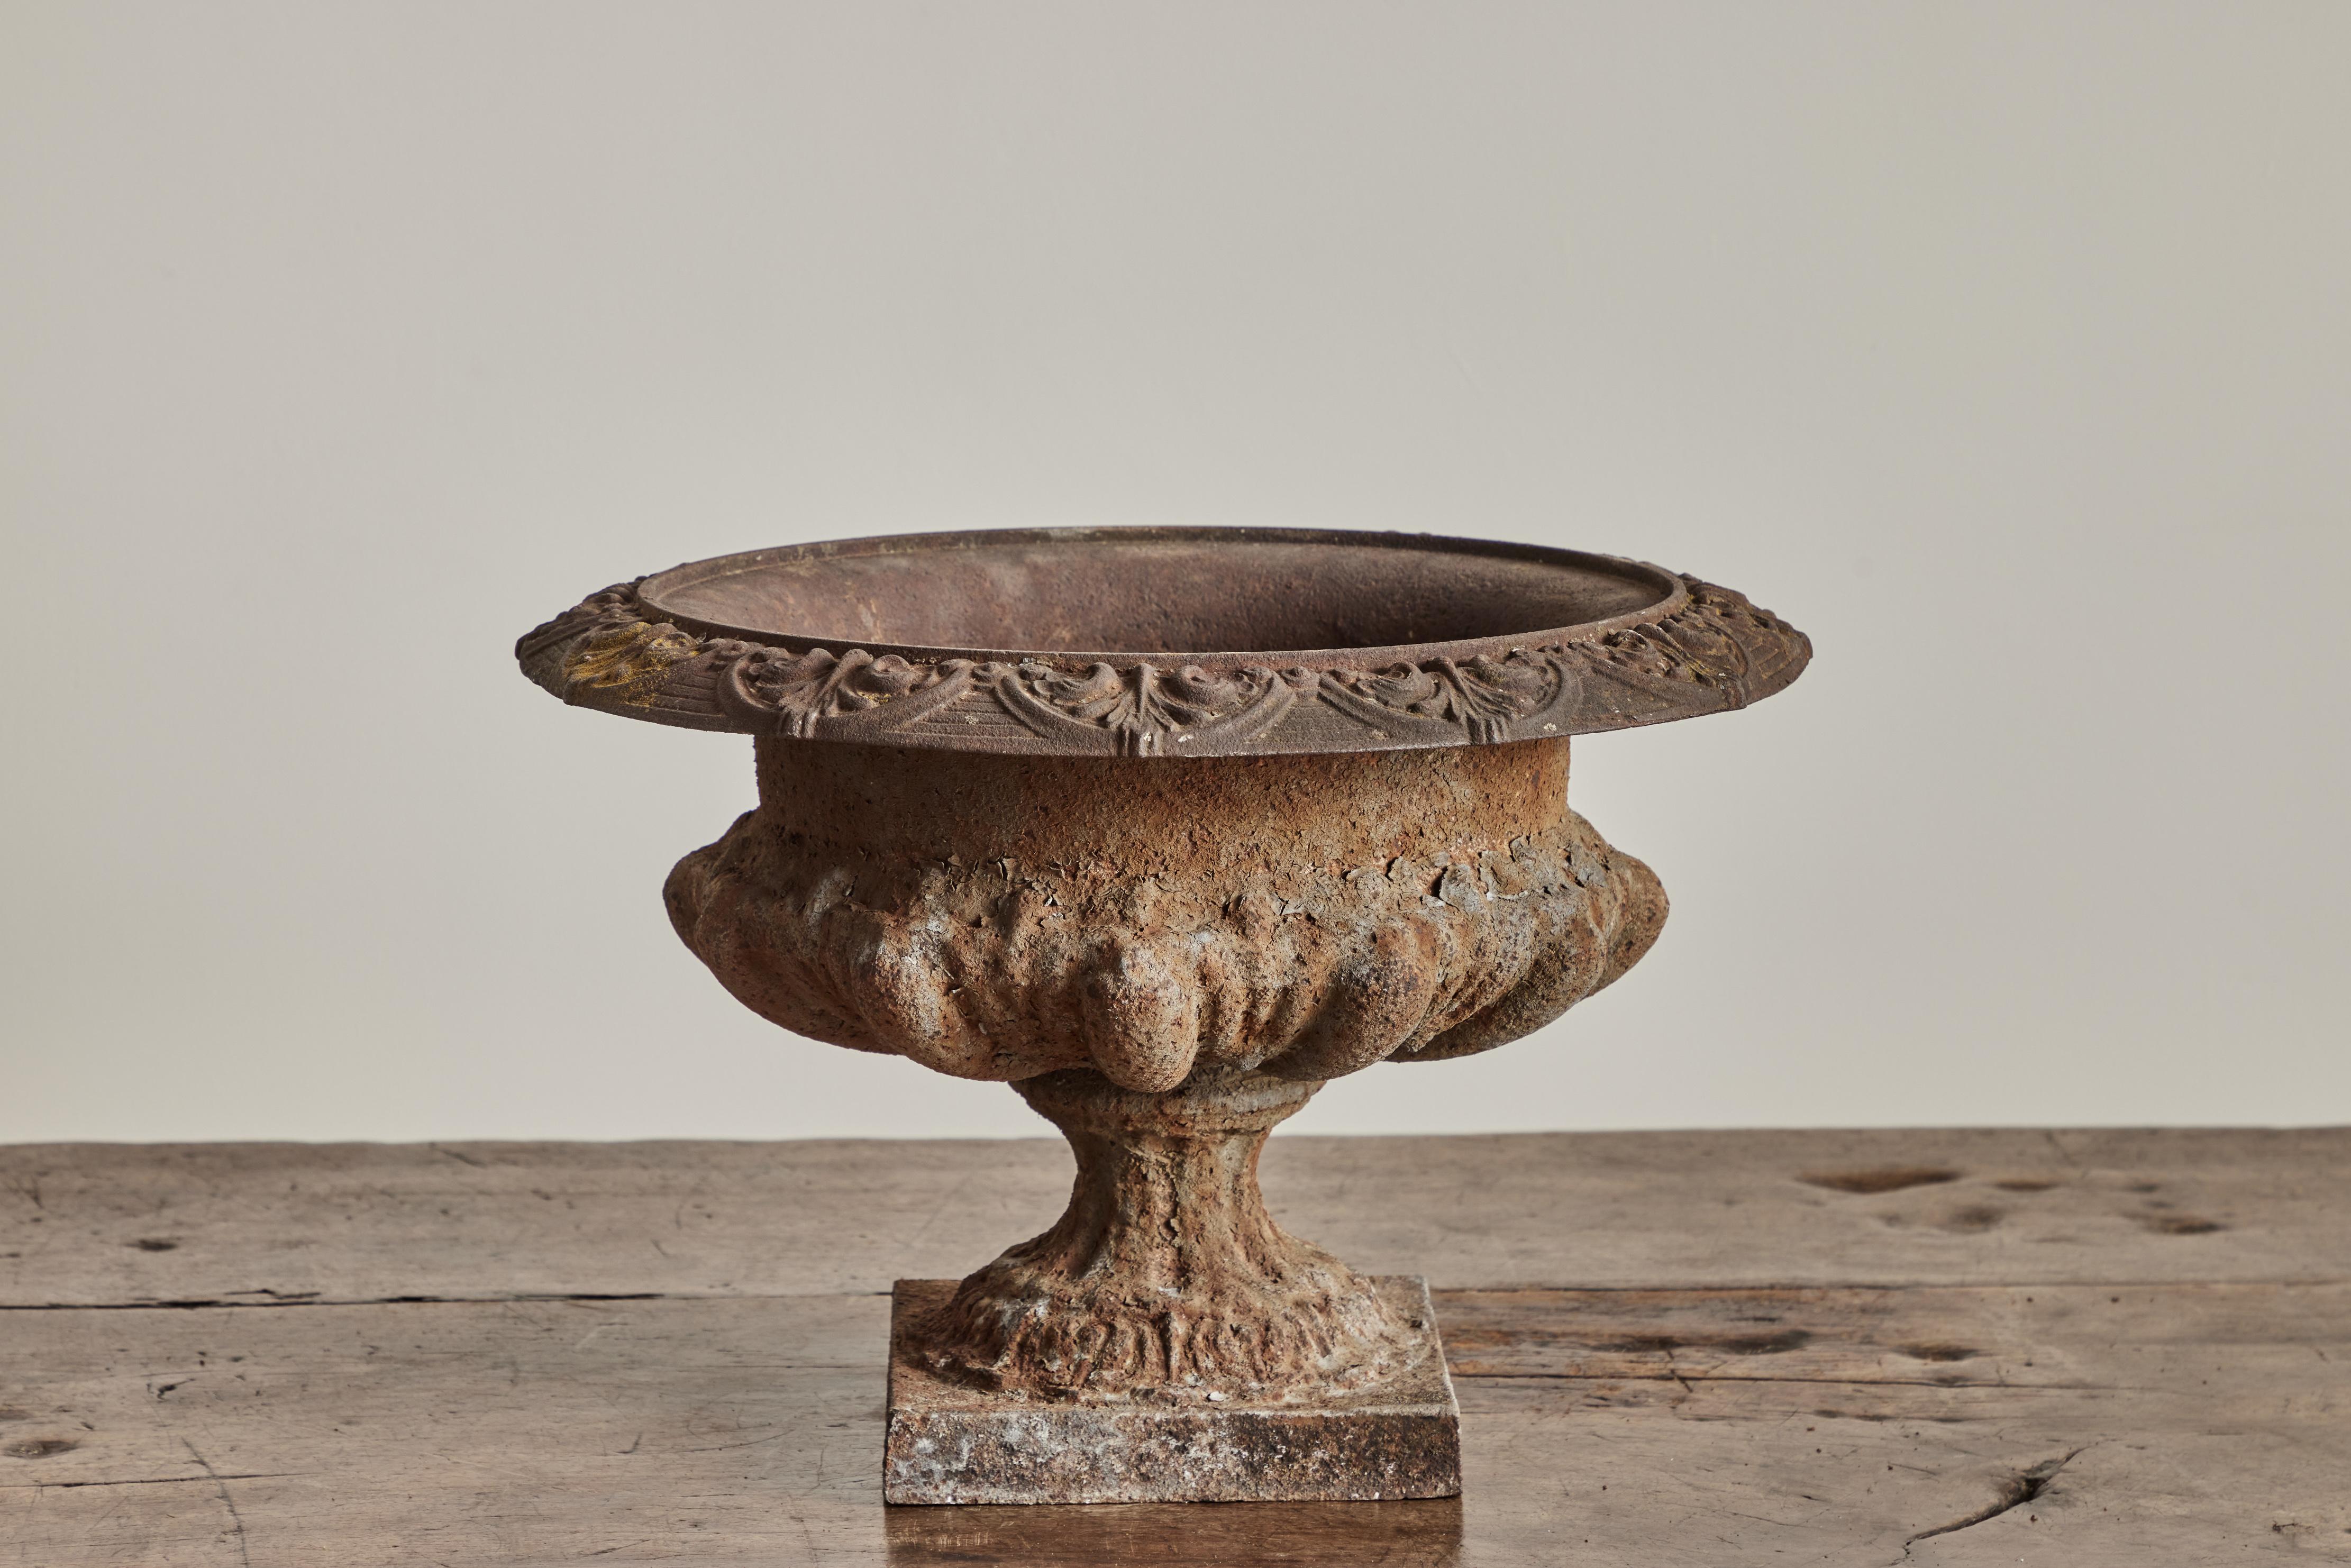 Antique cast iron garden urn circa 1900. Visible wear throughout on metal is consistent with age and use. Two urns received, each sold separately. This item requires white glove 